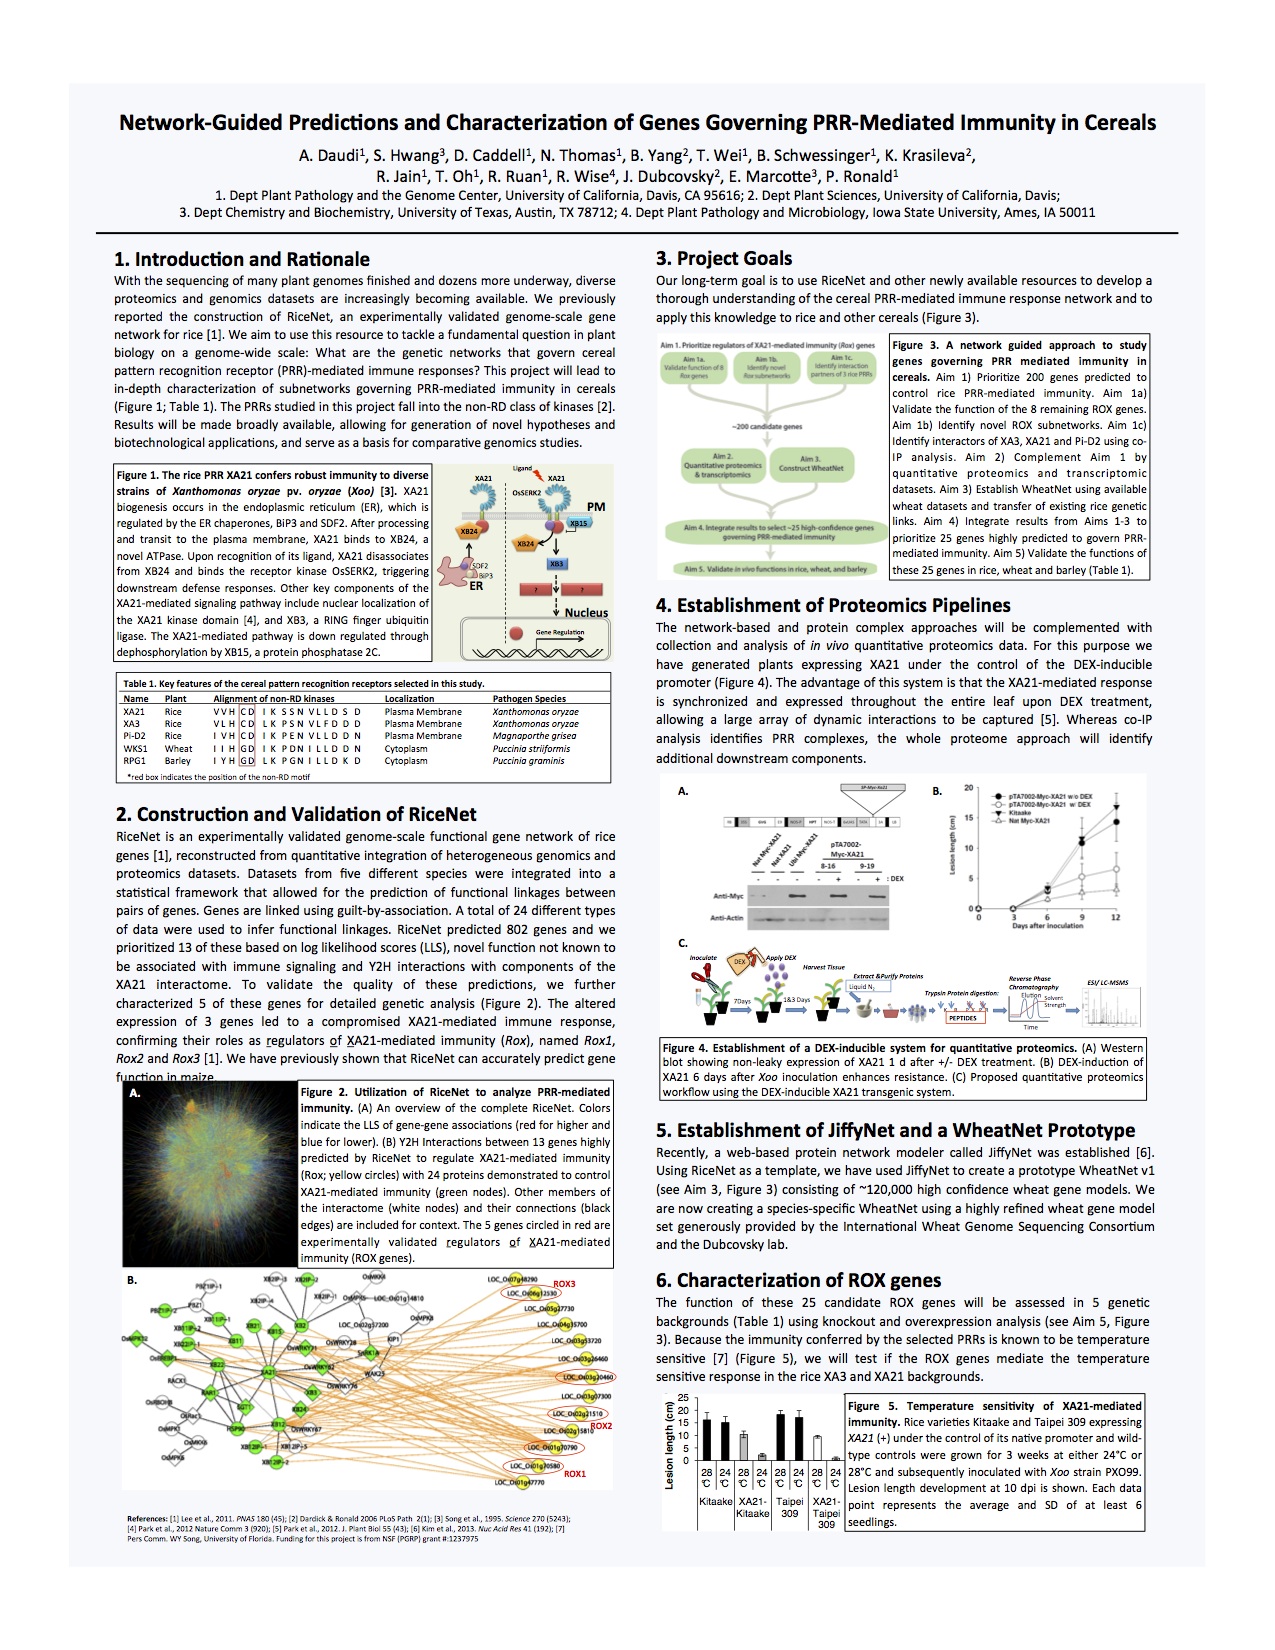 Network-Guided Predictions and Characterization of Genes Governing PRR-Mediated Immunity in Cereals poster